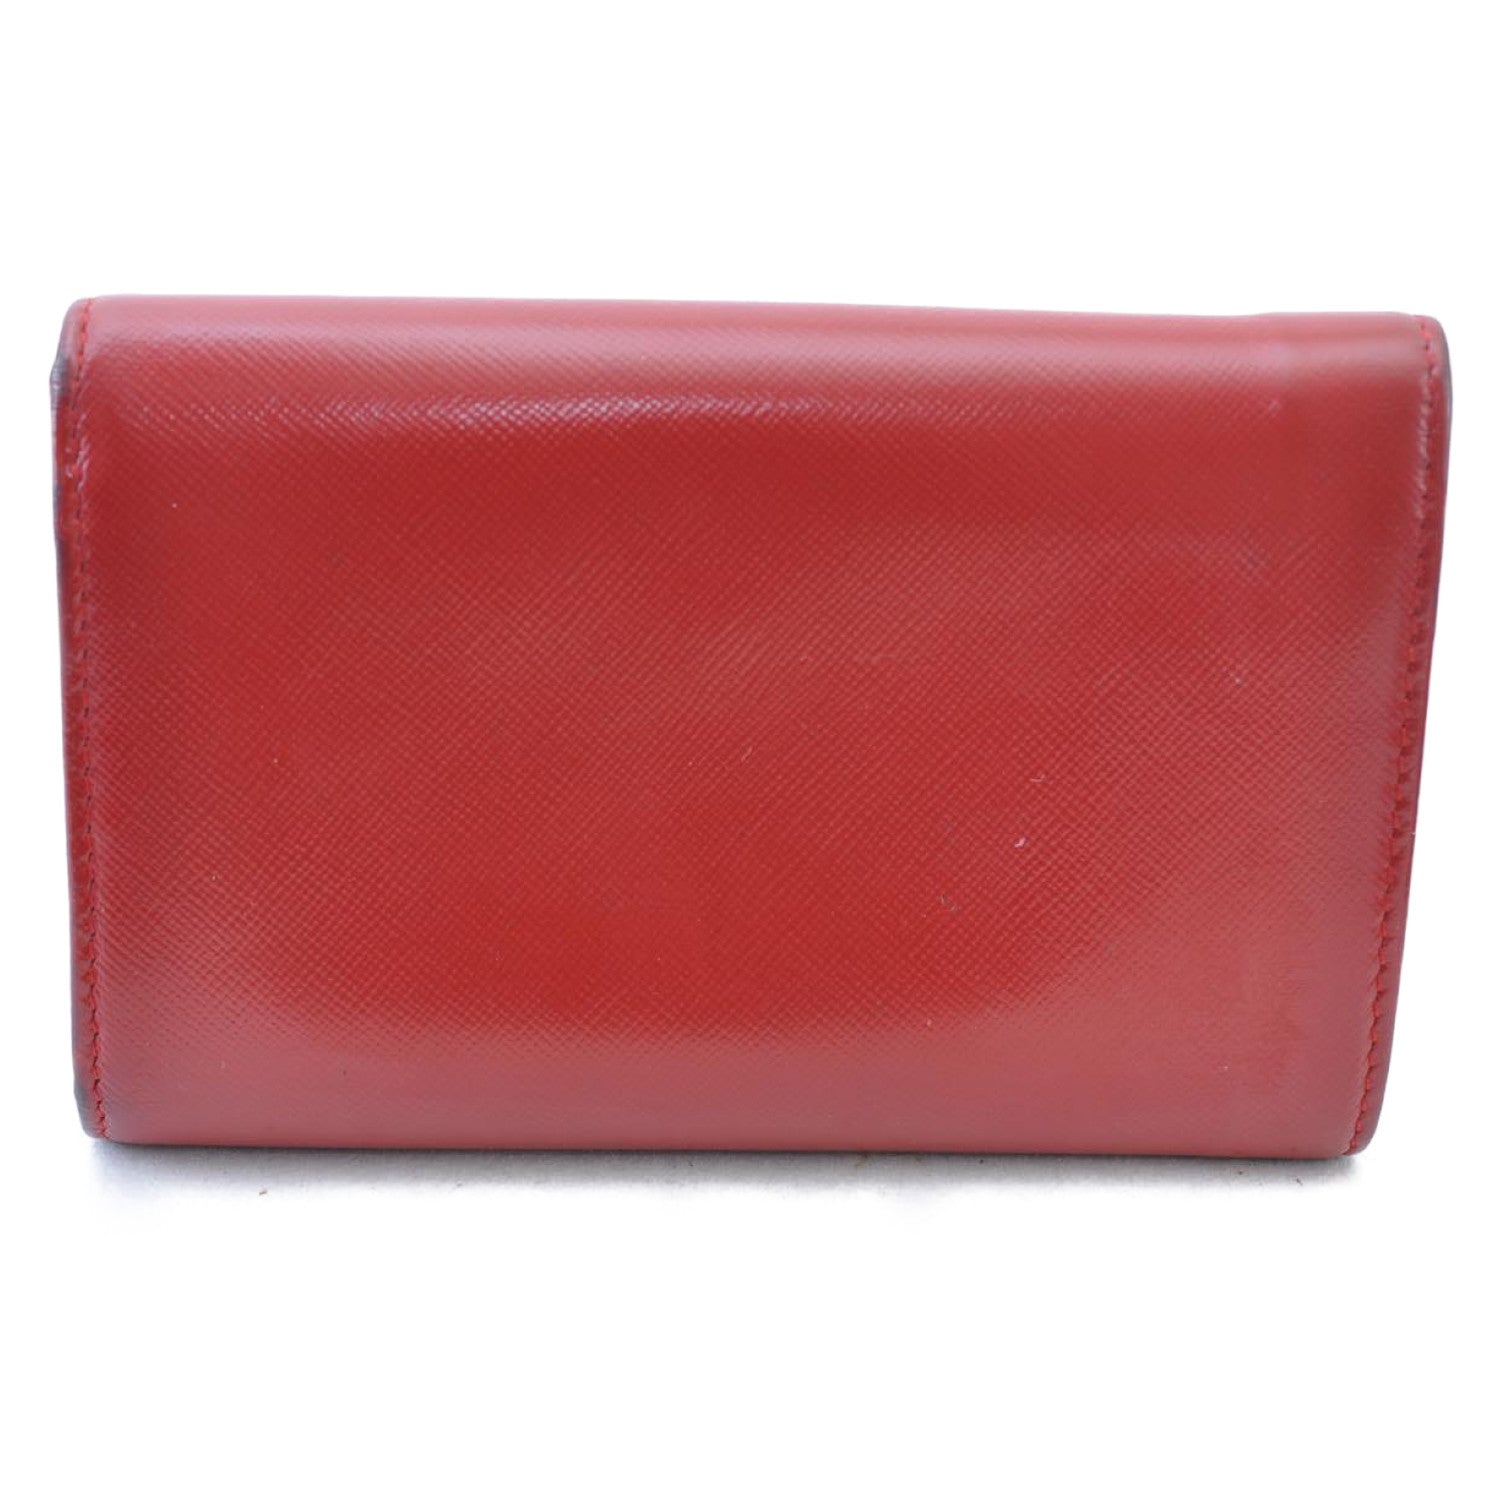 PRADA Leather Long Wallet Leather Red Auth am1941s